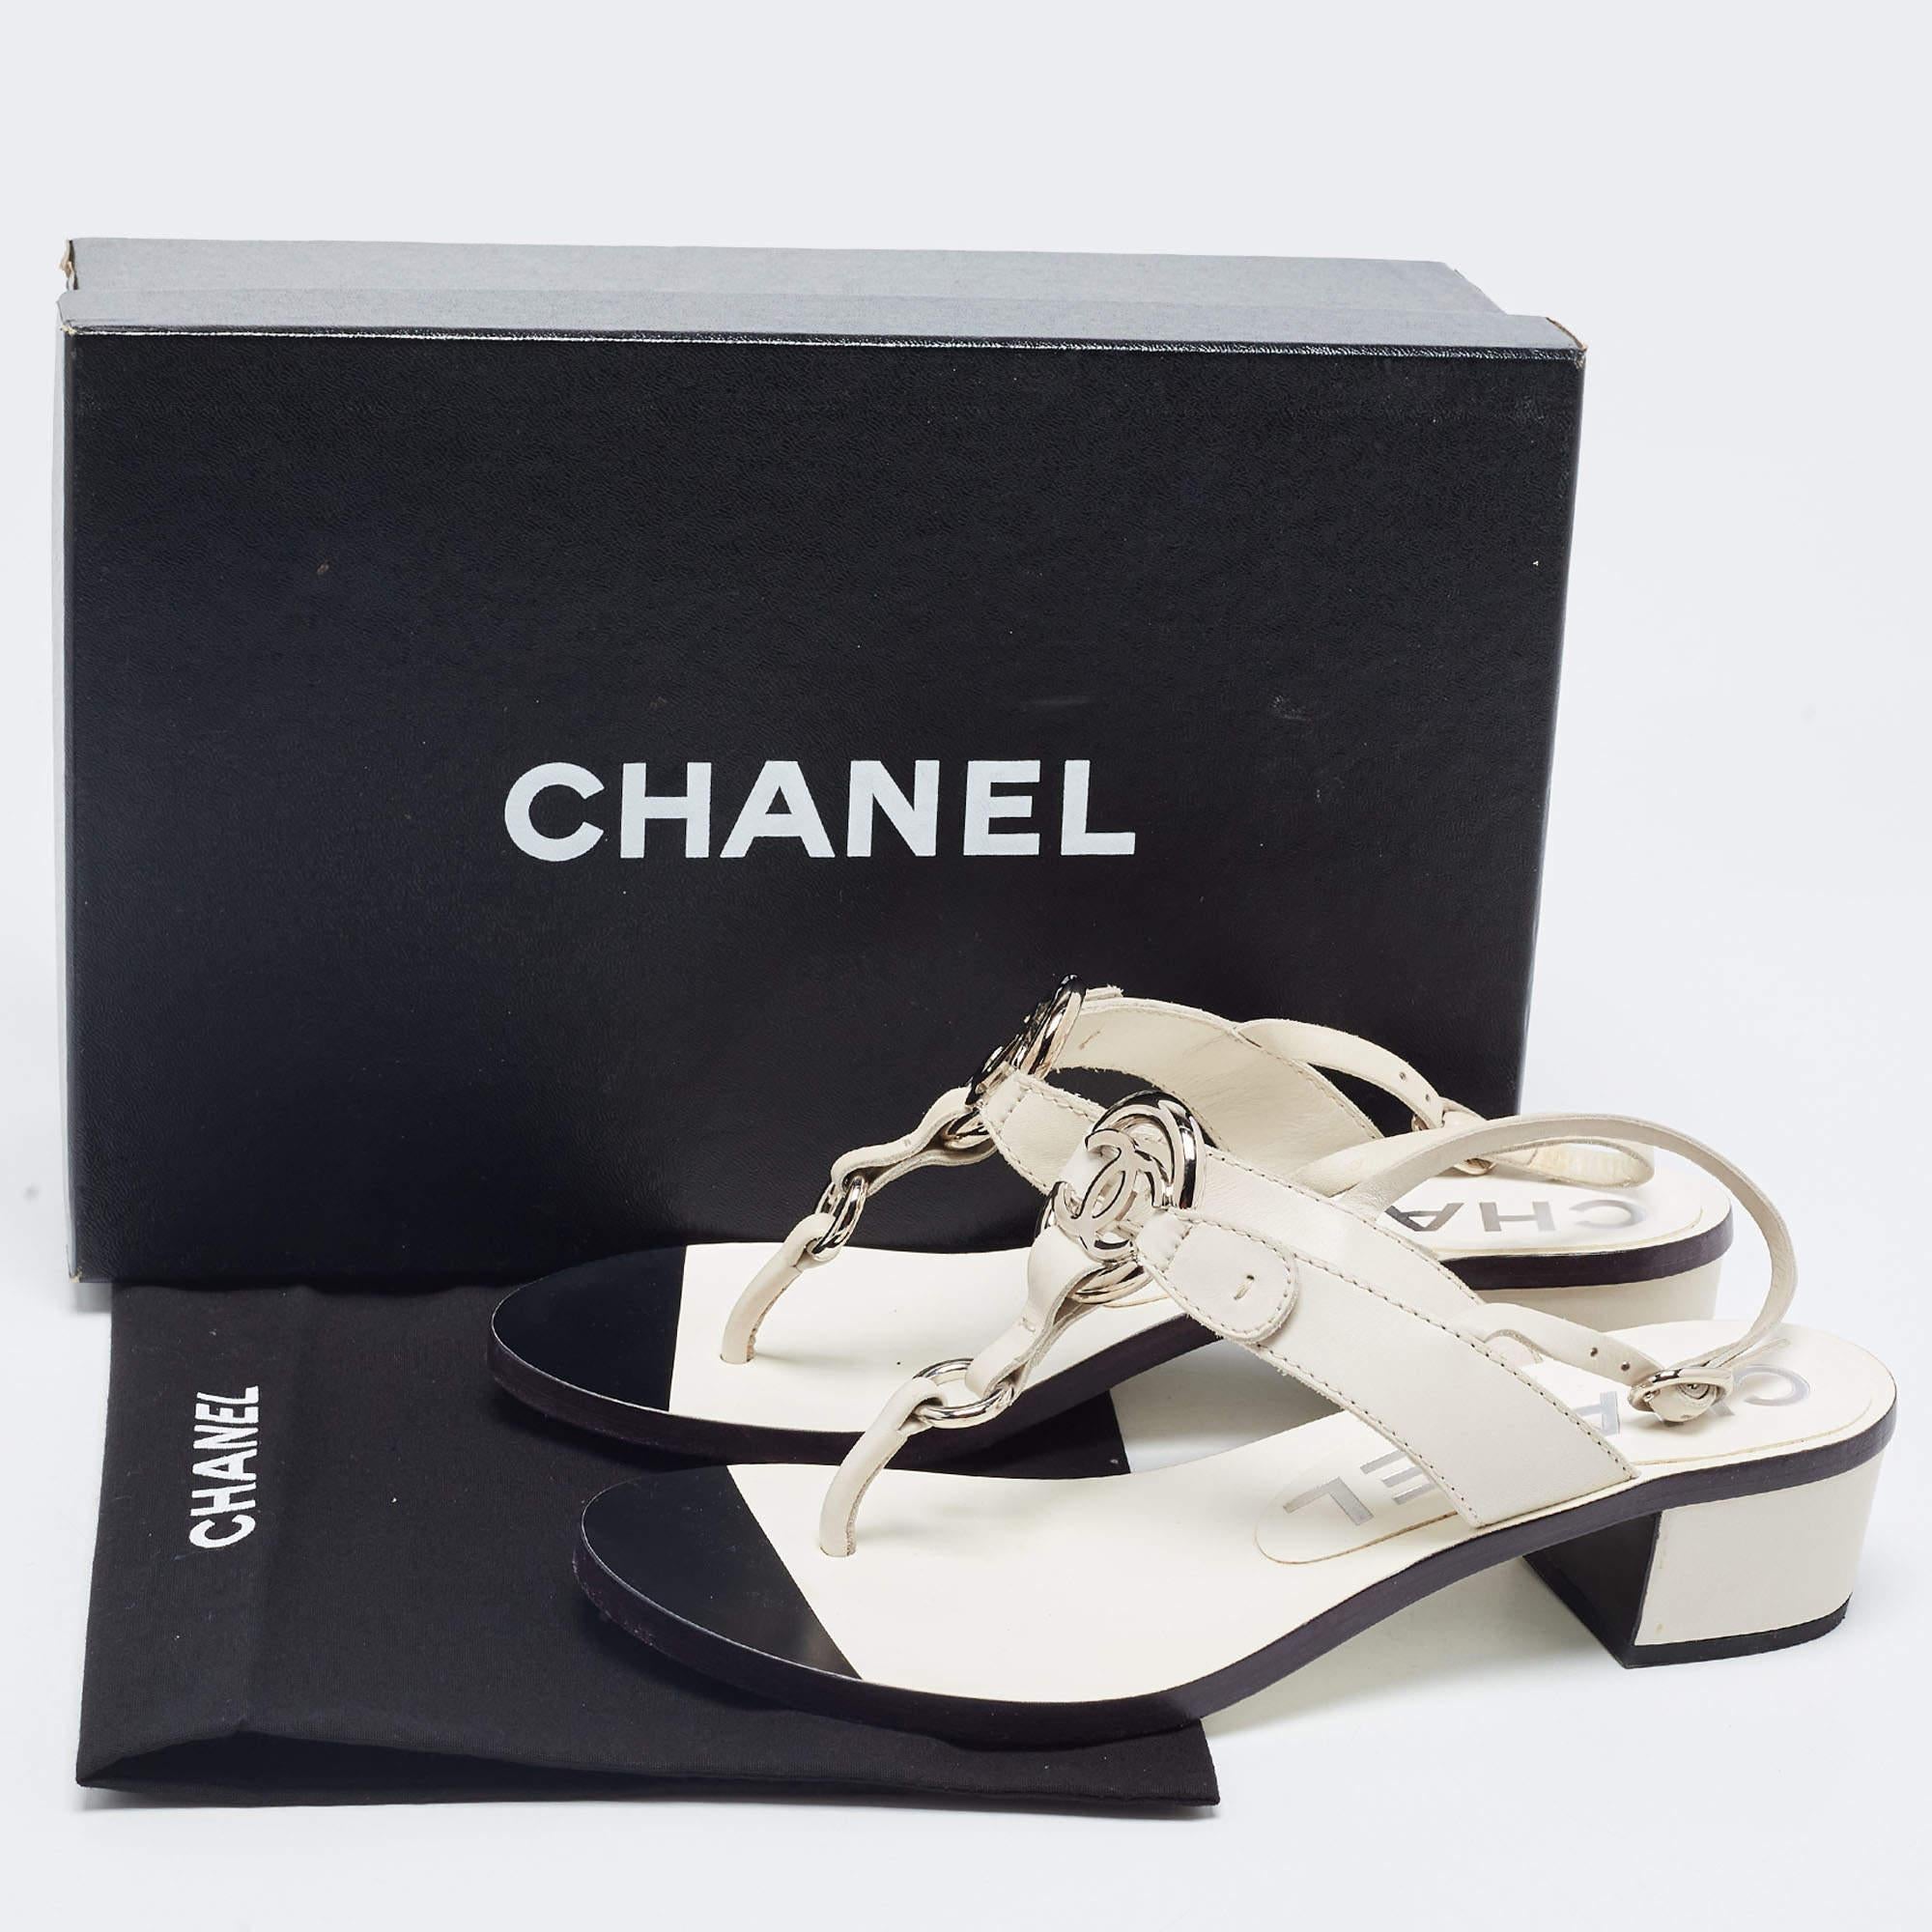 Chanel White Leather Slingback Sandals Size 37 6